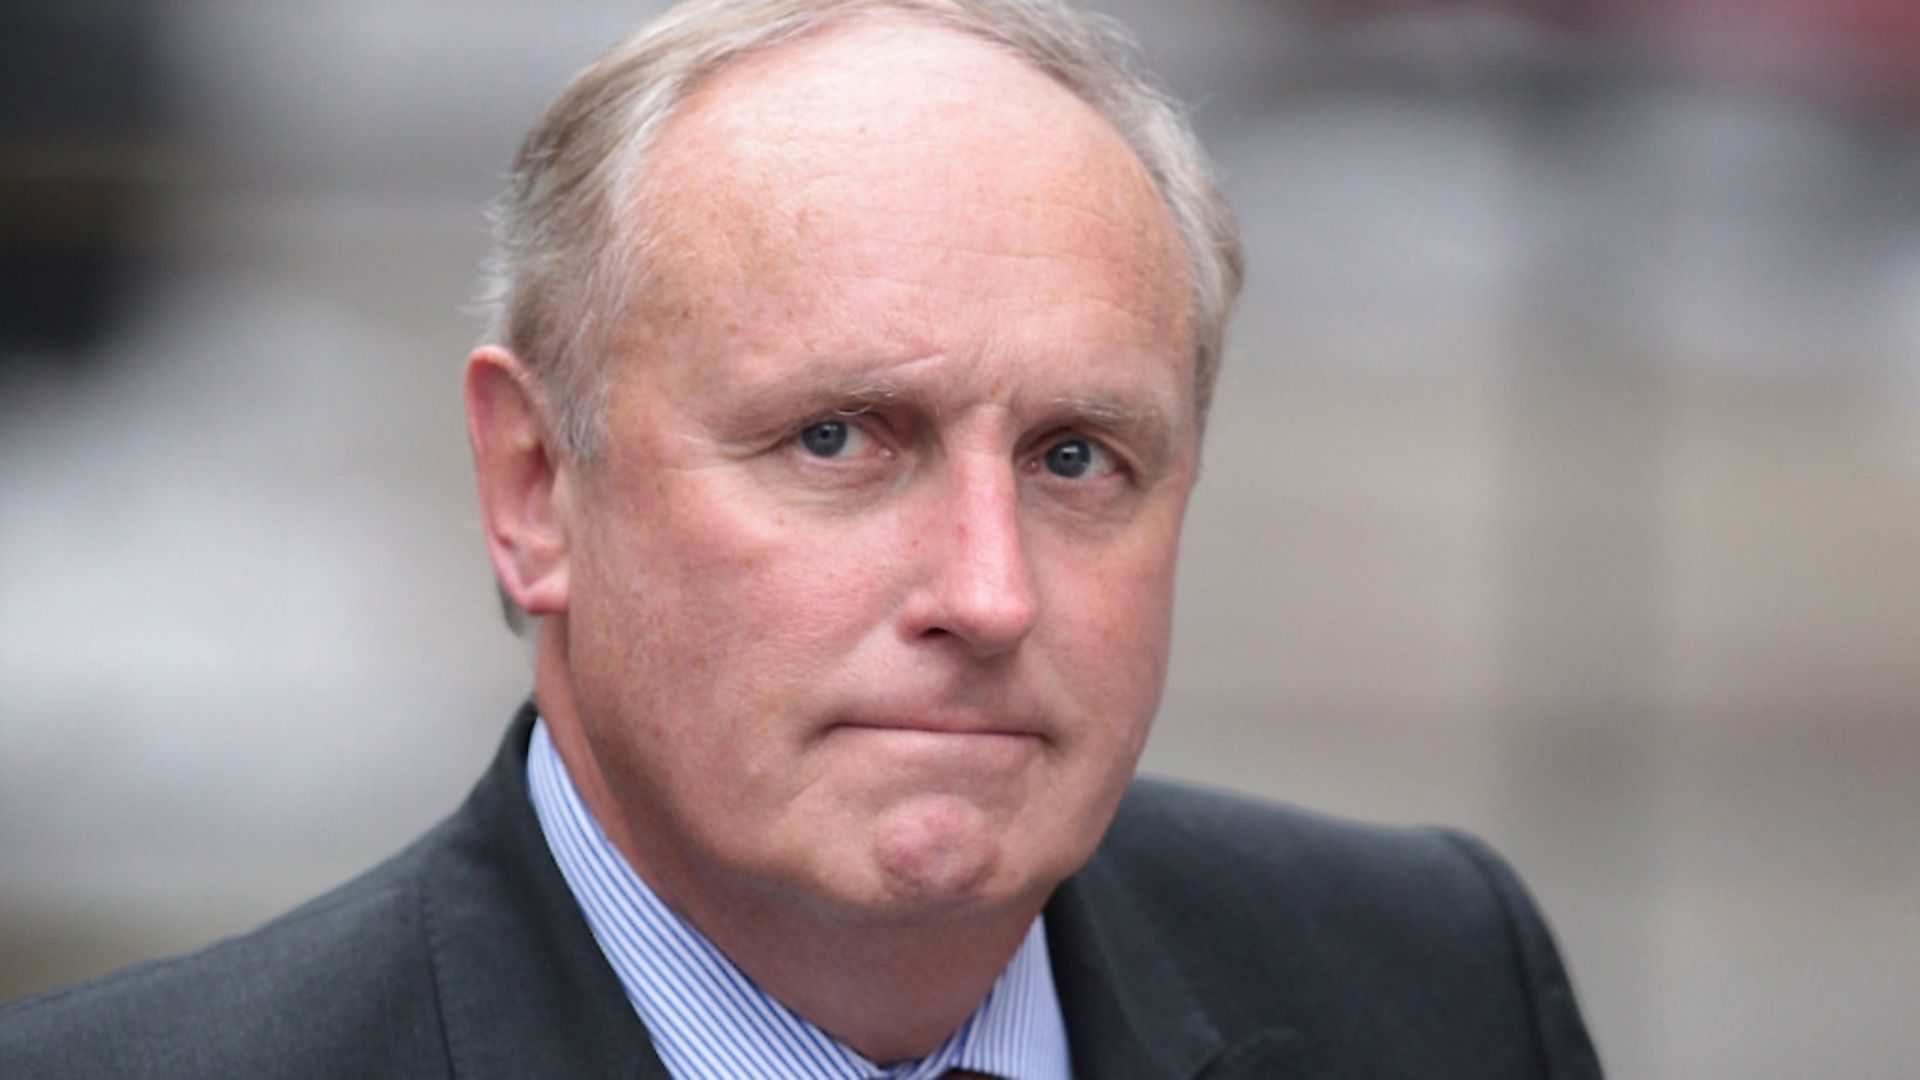 DMG Media editor-in-chief Paul Dacre. Photo: Getty - Credit: Getty Images